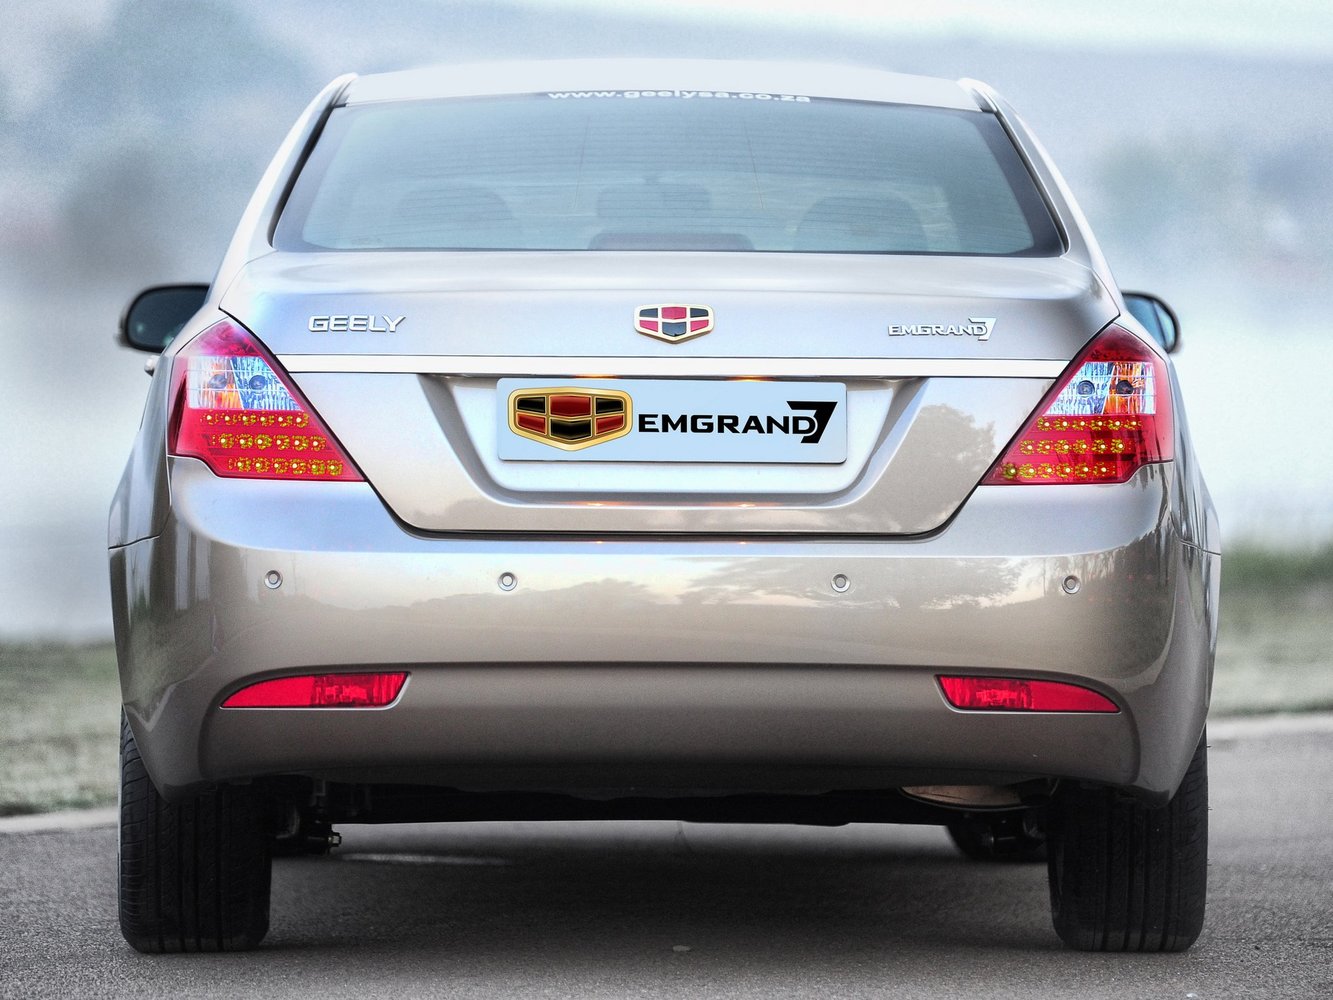 Geely emgrand luxury. Geely Emgrand ec7. Jelly Emerald ec7. Geely Emgrand ec7 седан. Geely Emgrand ес7.